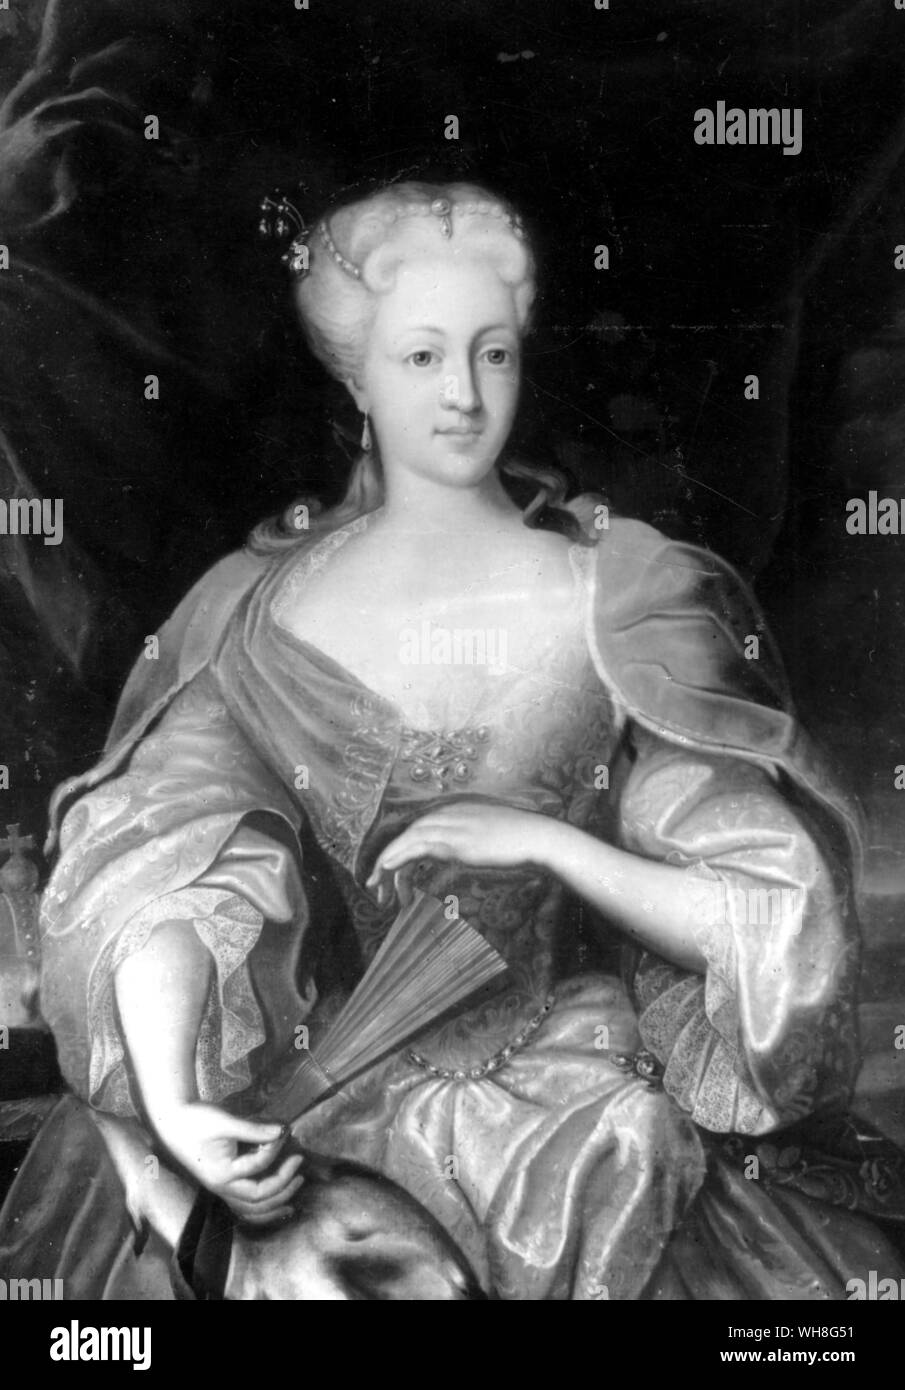 Maria Theresa, Archduchess of Austria, as a young woman (1717-1780). The first and only female head of the Habsburg dynasty. She was Archduchess of Austria, and Queen of Hungary and Bohemia and ruler of other territories, from 1740. Frederick the Great by Nancy Mitford, page 88.. . . . . Frederick the Great by Nancy Mitford page 88. Stock Photo